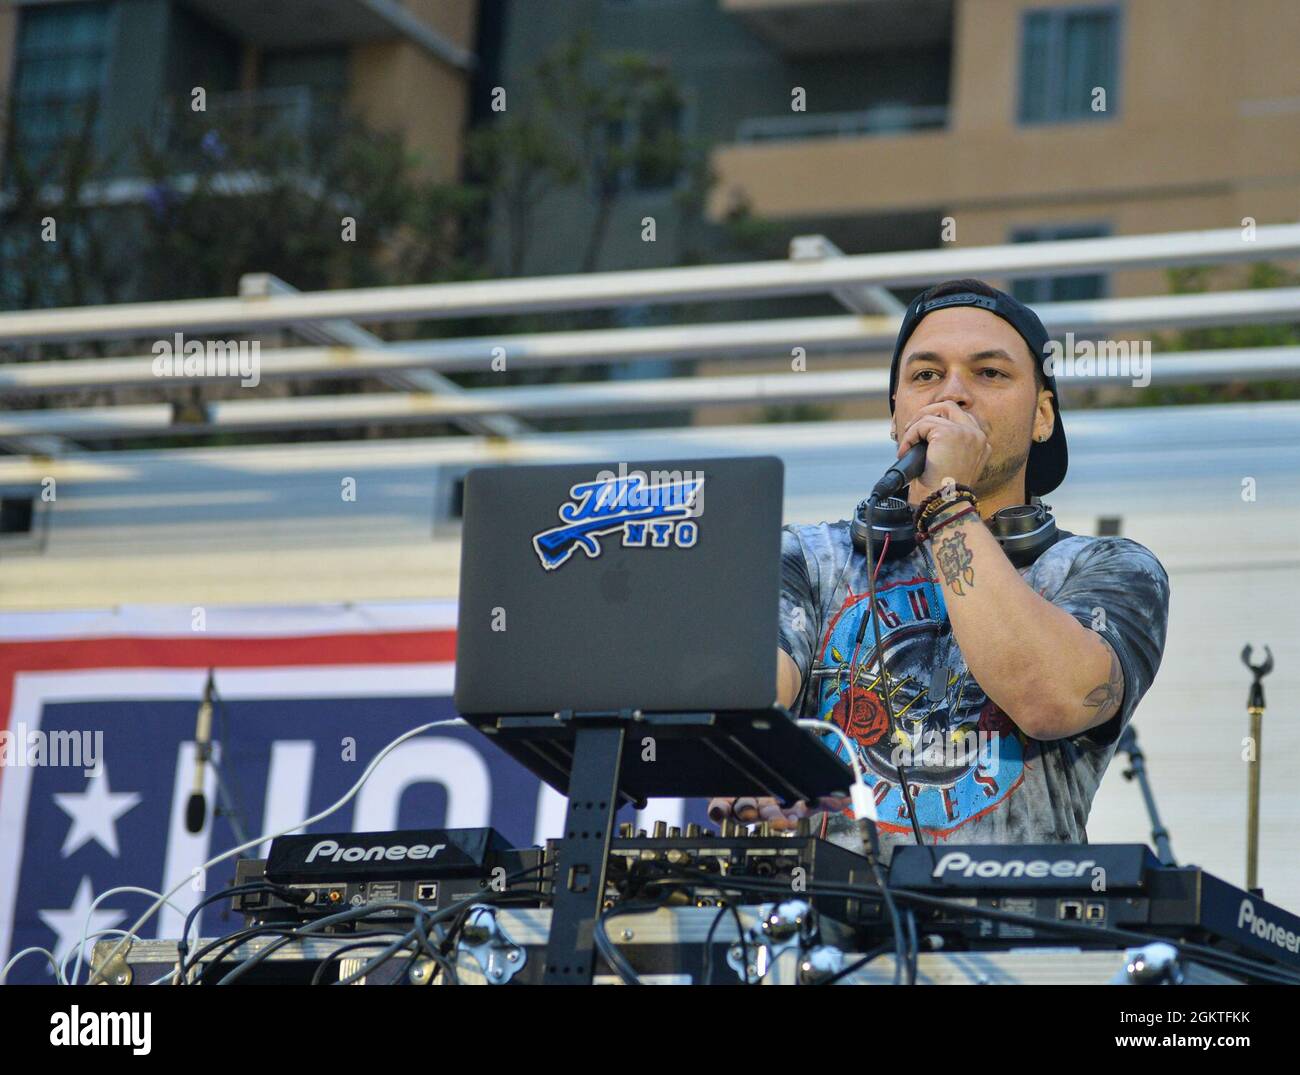 210629-N-MJ716-0178 NAVAL BASE SAN DIEGO (June 29, 2021) DJ J. Dayz performs at the USO Summer tour show held at the Pacific Beacon courtyard on Naval Base San Diego. The USO Summer Tour show consisted of entertainers, singers and comedians dedicating their time to lifting the spirits of our military at various bases across the country. Stock Photo